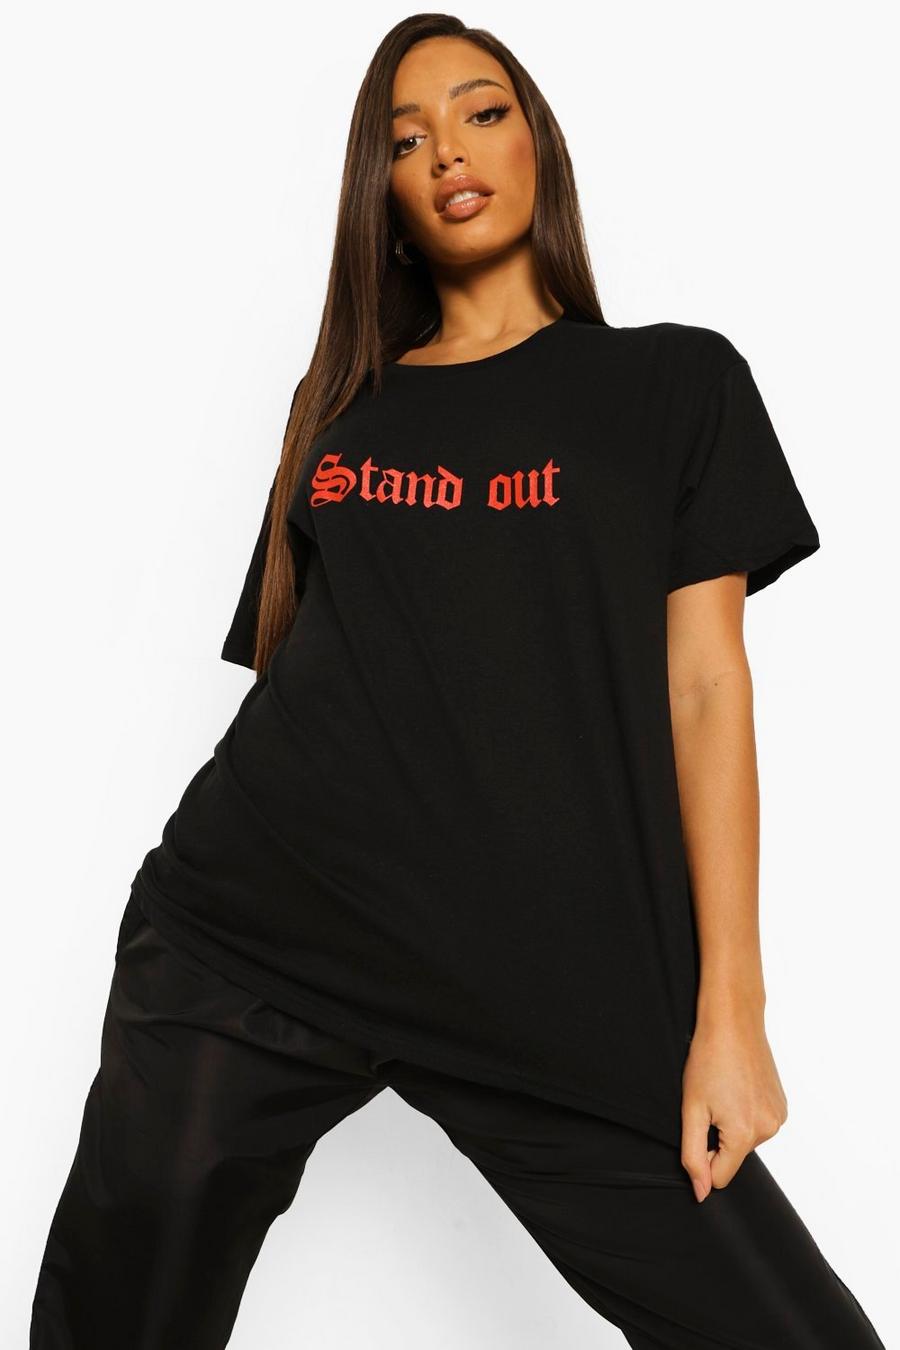 Camiseta con eslogan “Sport Out” Tall, Negro image number 1